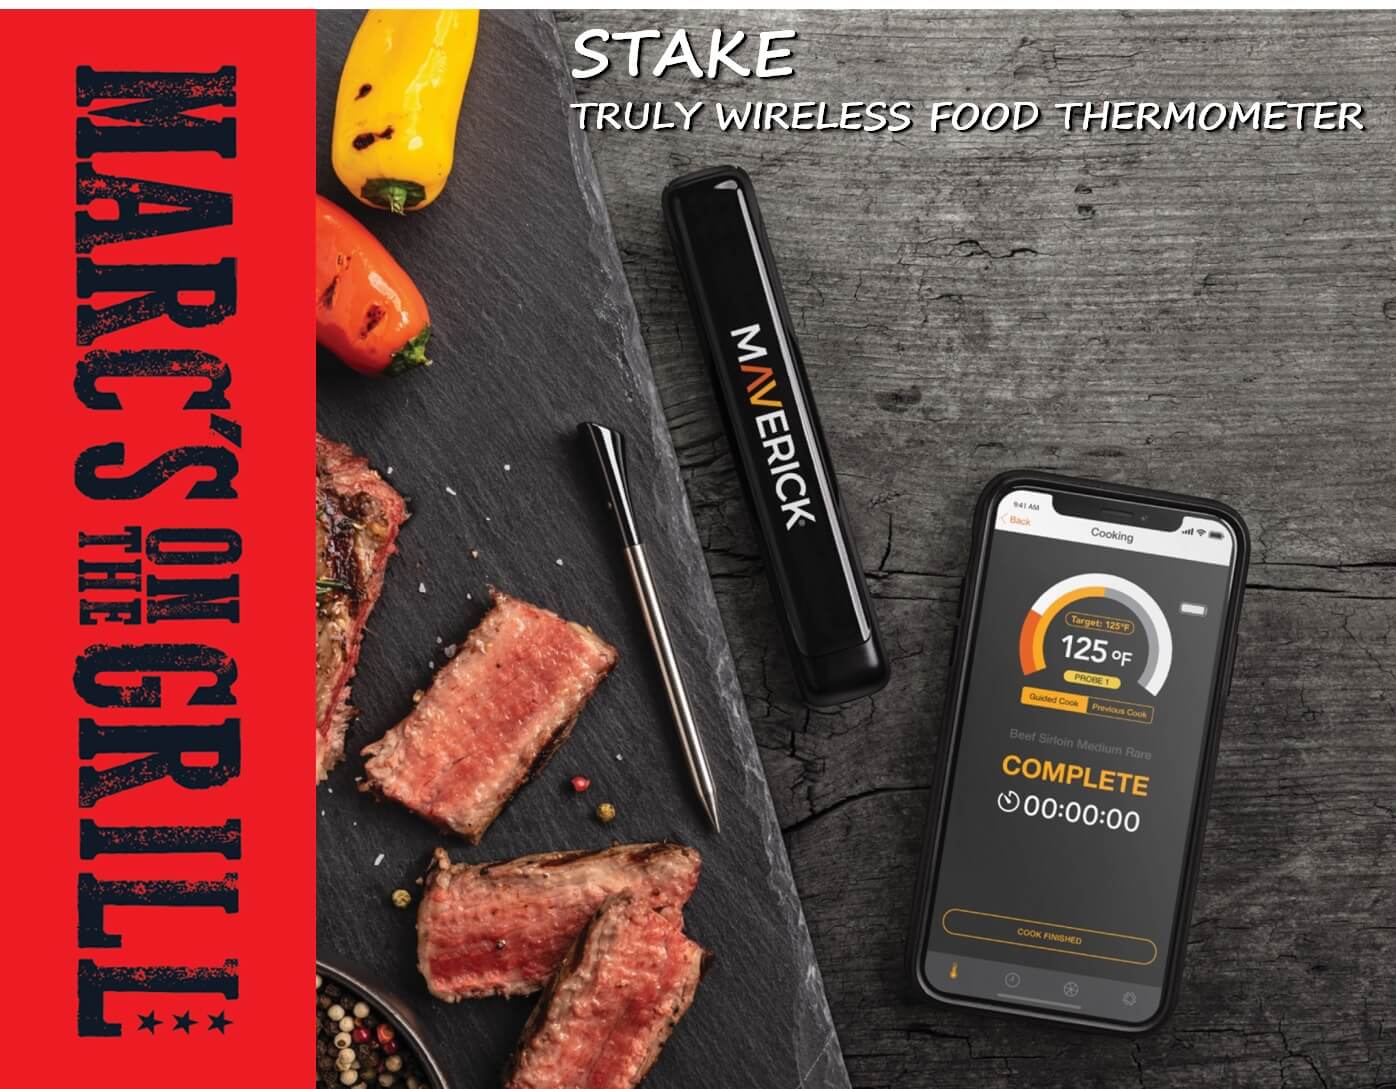 The STAKE by Maverick Wireless Meat Thermometer